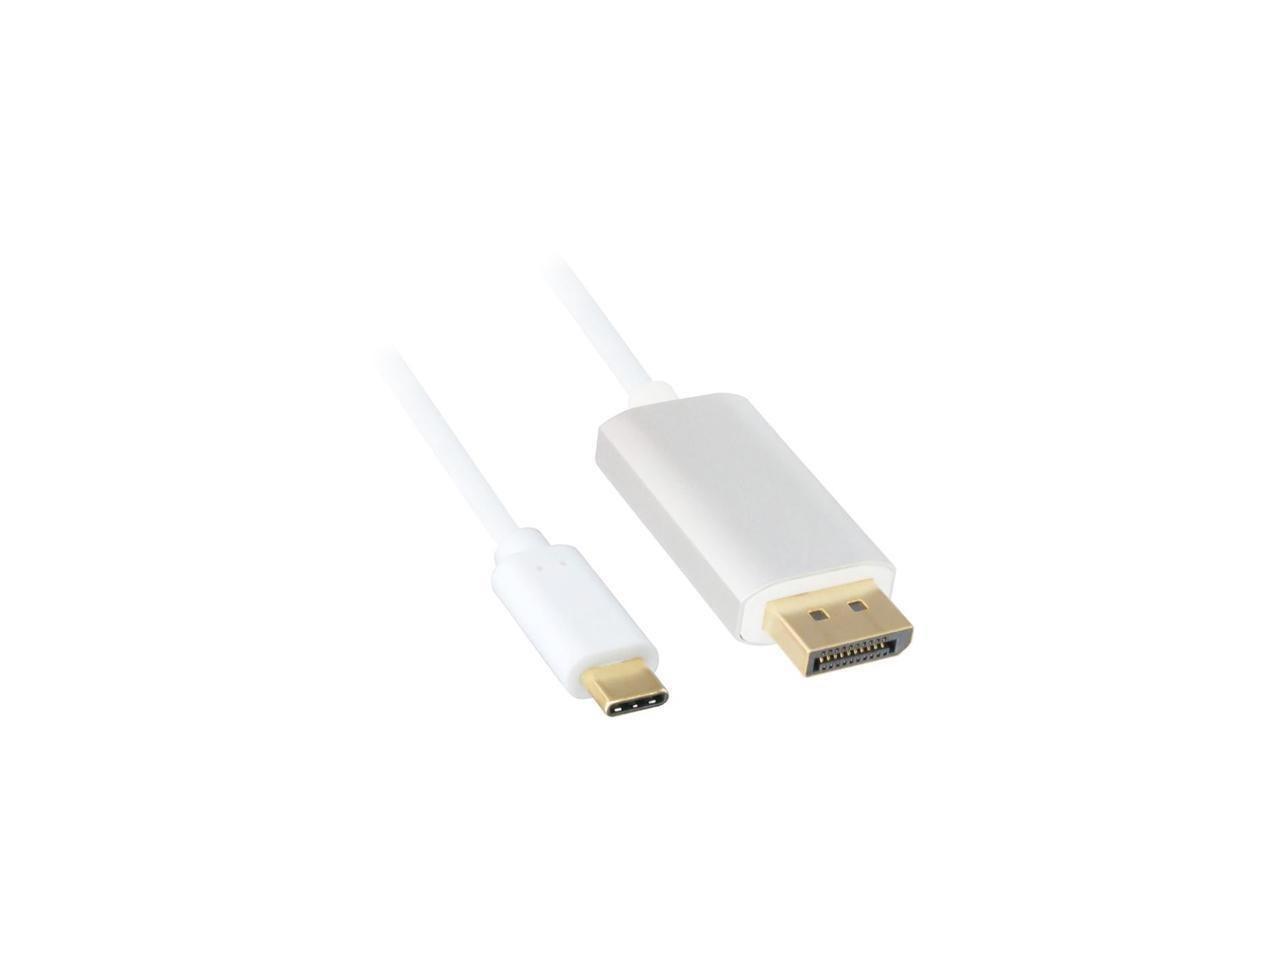 Nippon Labs 50Usb31c-Dp-15 15FT Usb-C To Displayport Cable - Supports 4K 60Hz